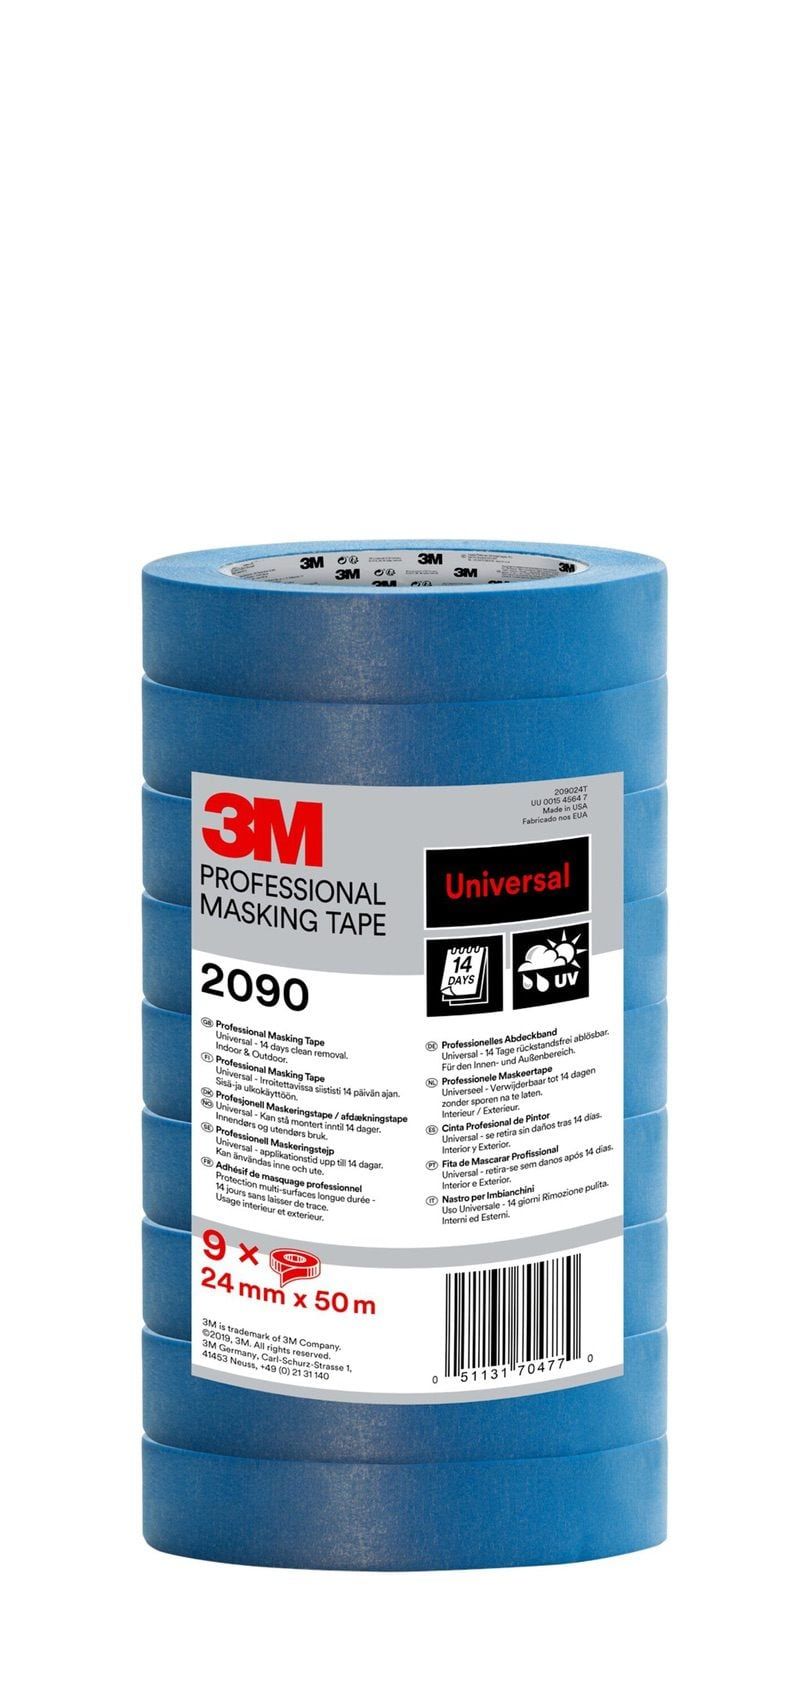 3M™ Professional Masking Tapes 2090 Multi-surfaces 9 Rolls 24 mm x 50 m